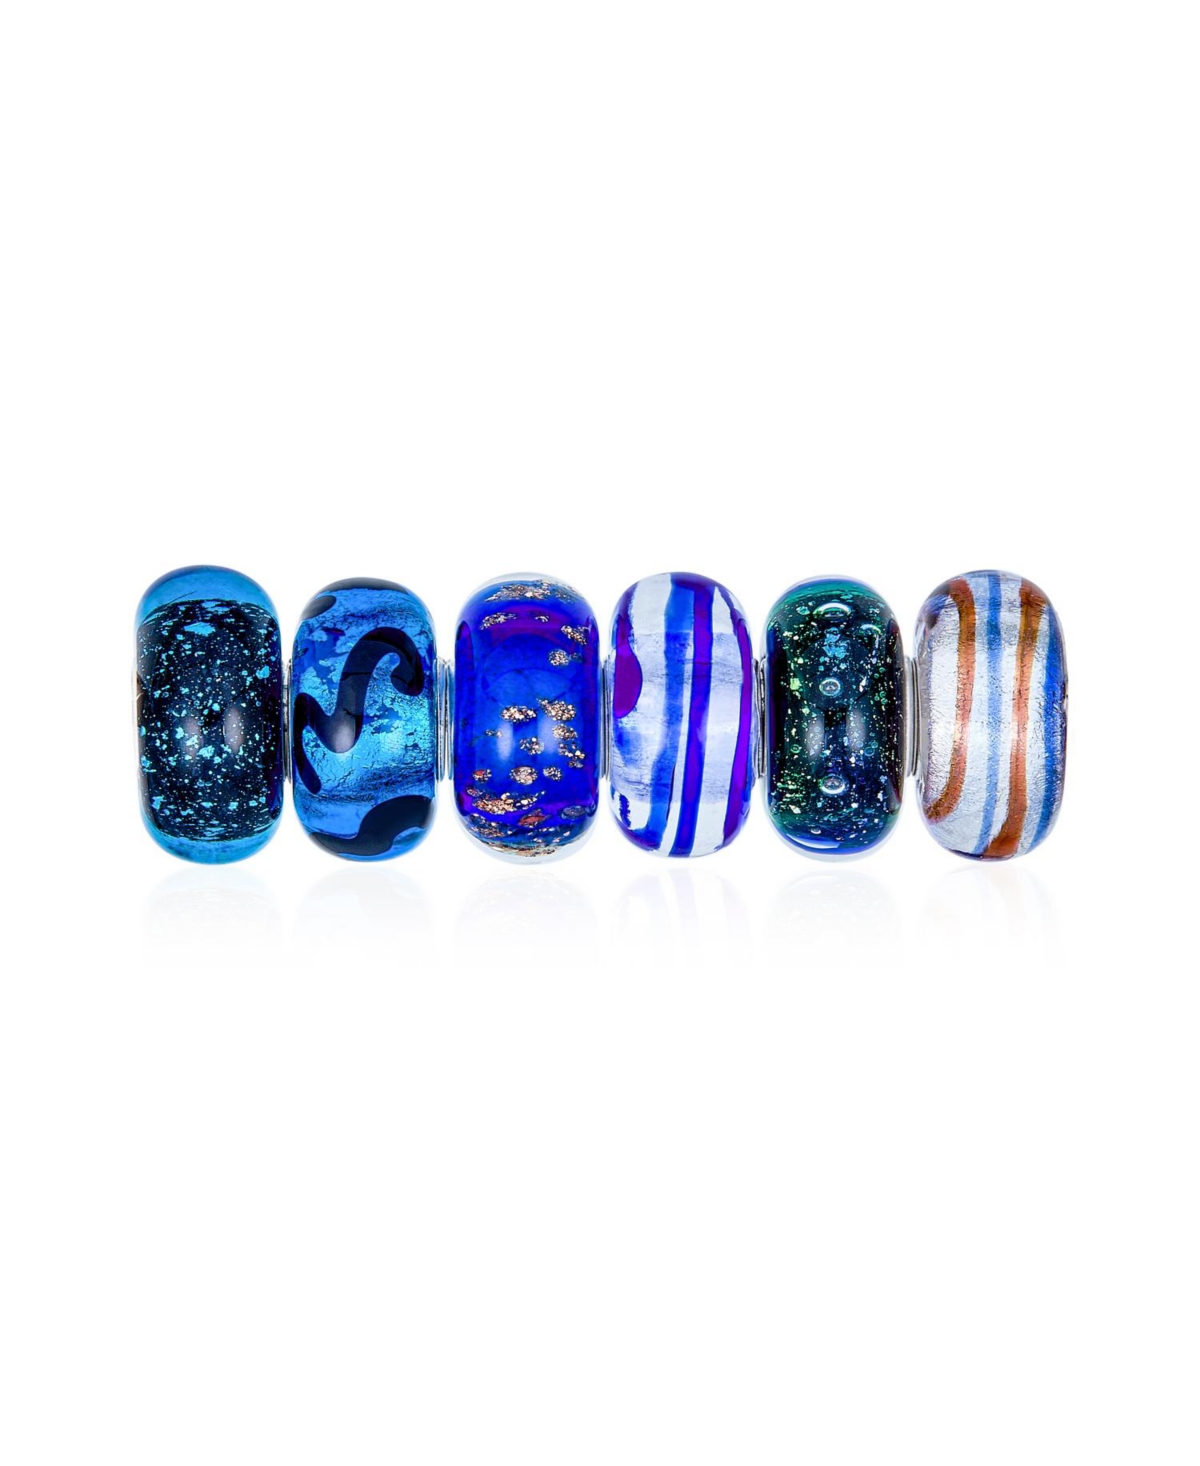 Assorted Mixed Set Of 6 Bundle Translucent Shades Of Black Blue Navy Silver Gold Foil Murano Swirl Charm Bead Spacer For Women Teen .925